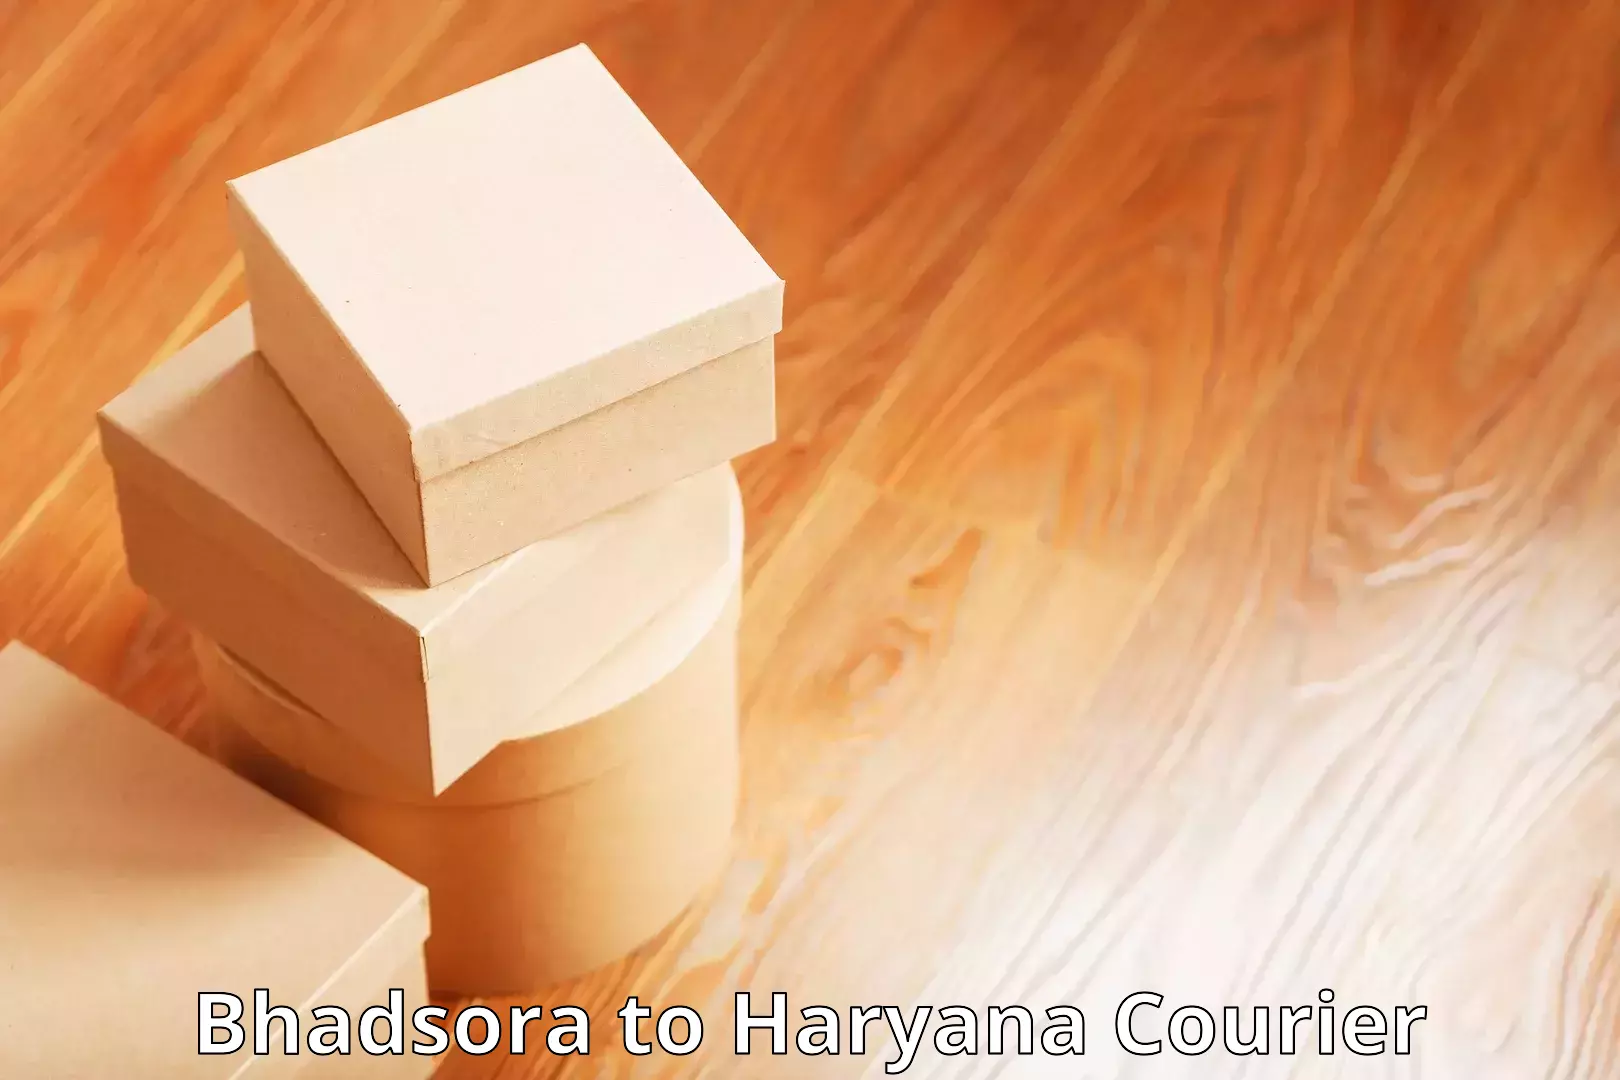 State-of-the-art courier technology Bhadsora to NCR Haryana